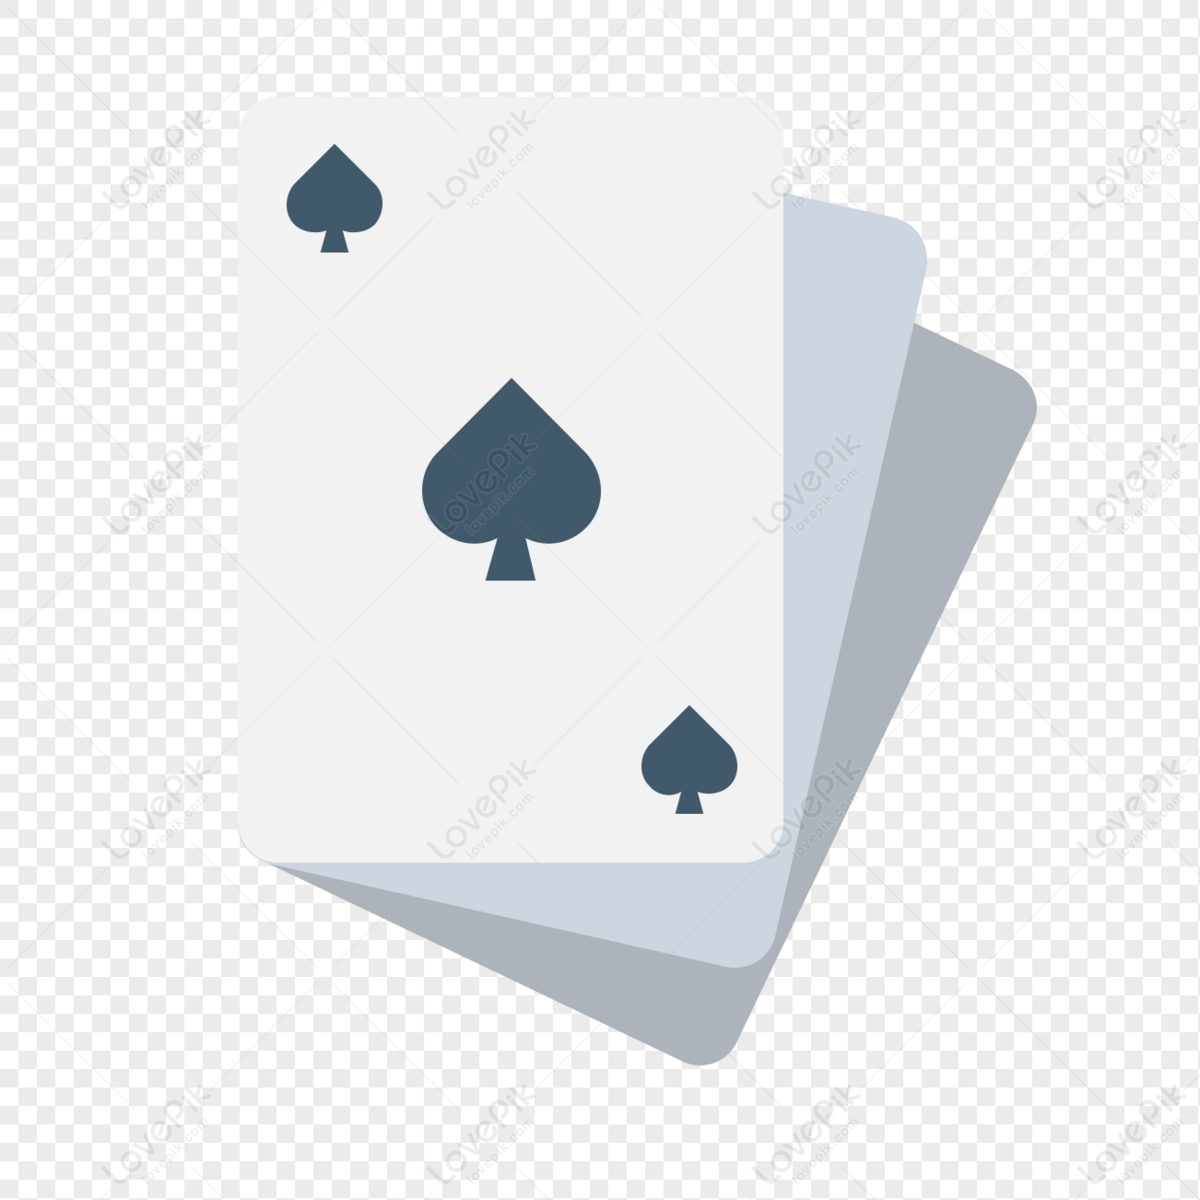 White cards Vectors & Illustrations for Free Download